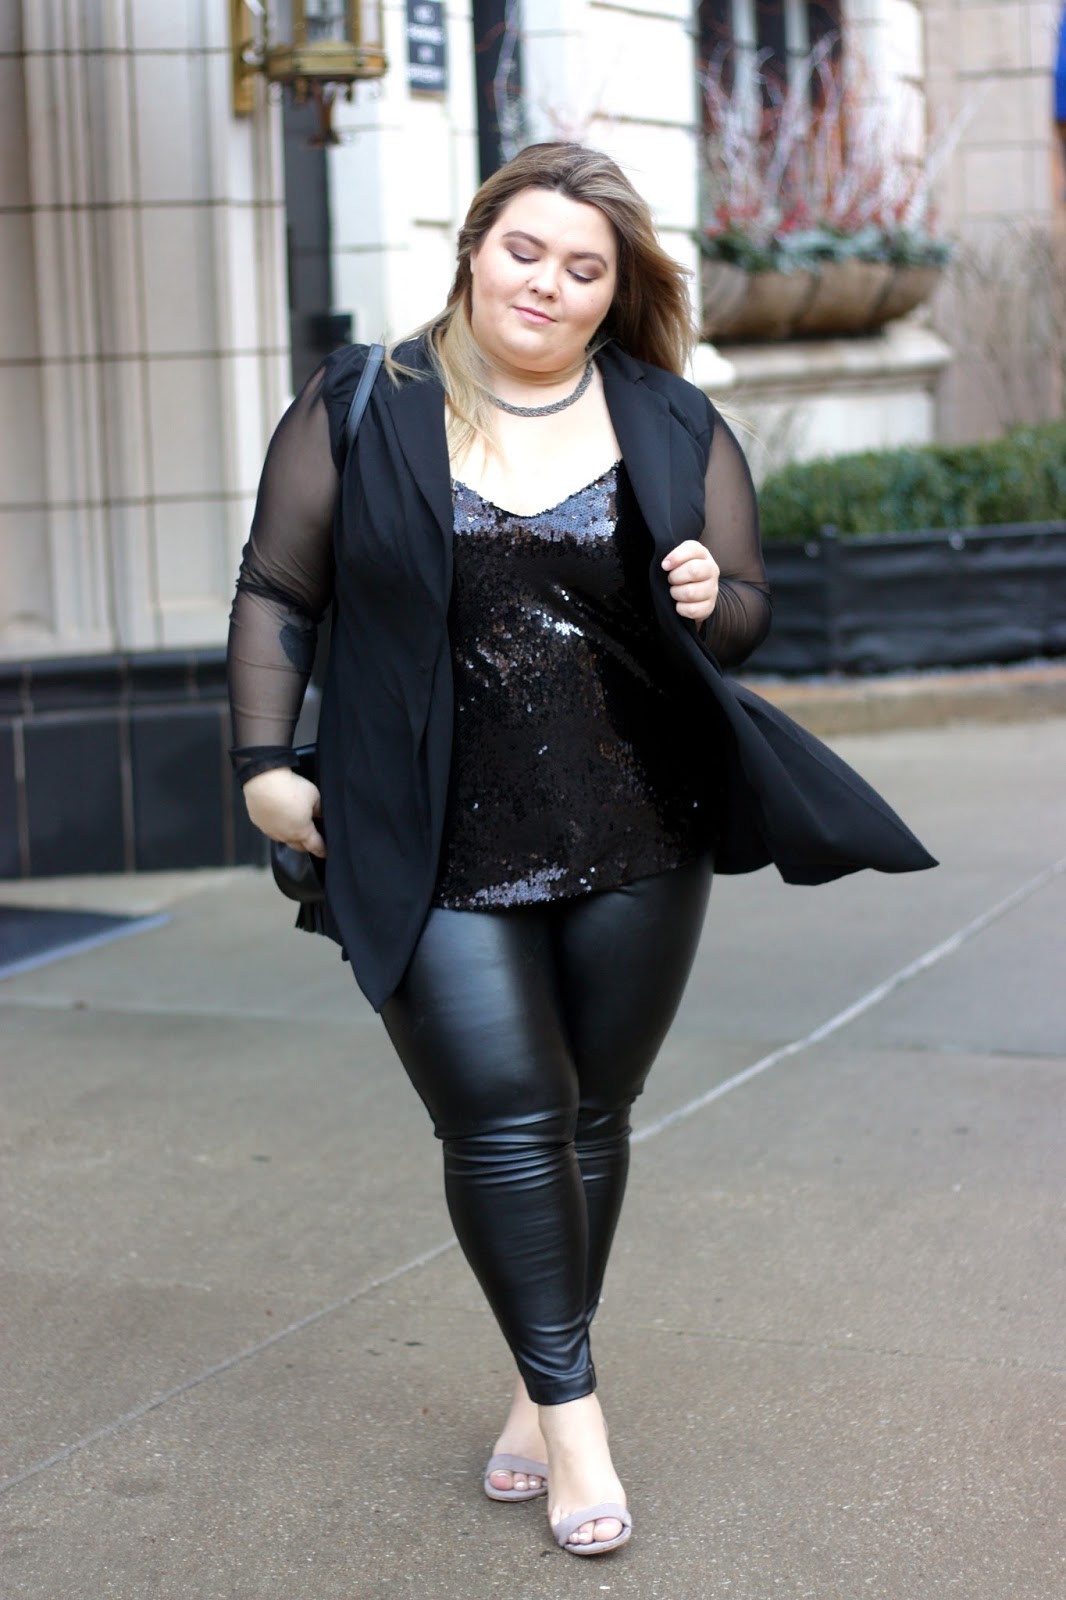 fashion to figure, natalie craig, where to shop for plus size clothing, natalie in the city, see through mesh, blazer, sequin tank top, plus size leather leggings pants, chicago blogger, valentines day date night ideas, valentines day outfit, fatshion, plus size blogger